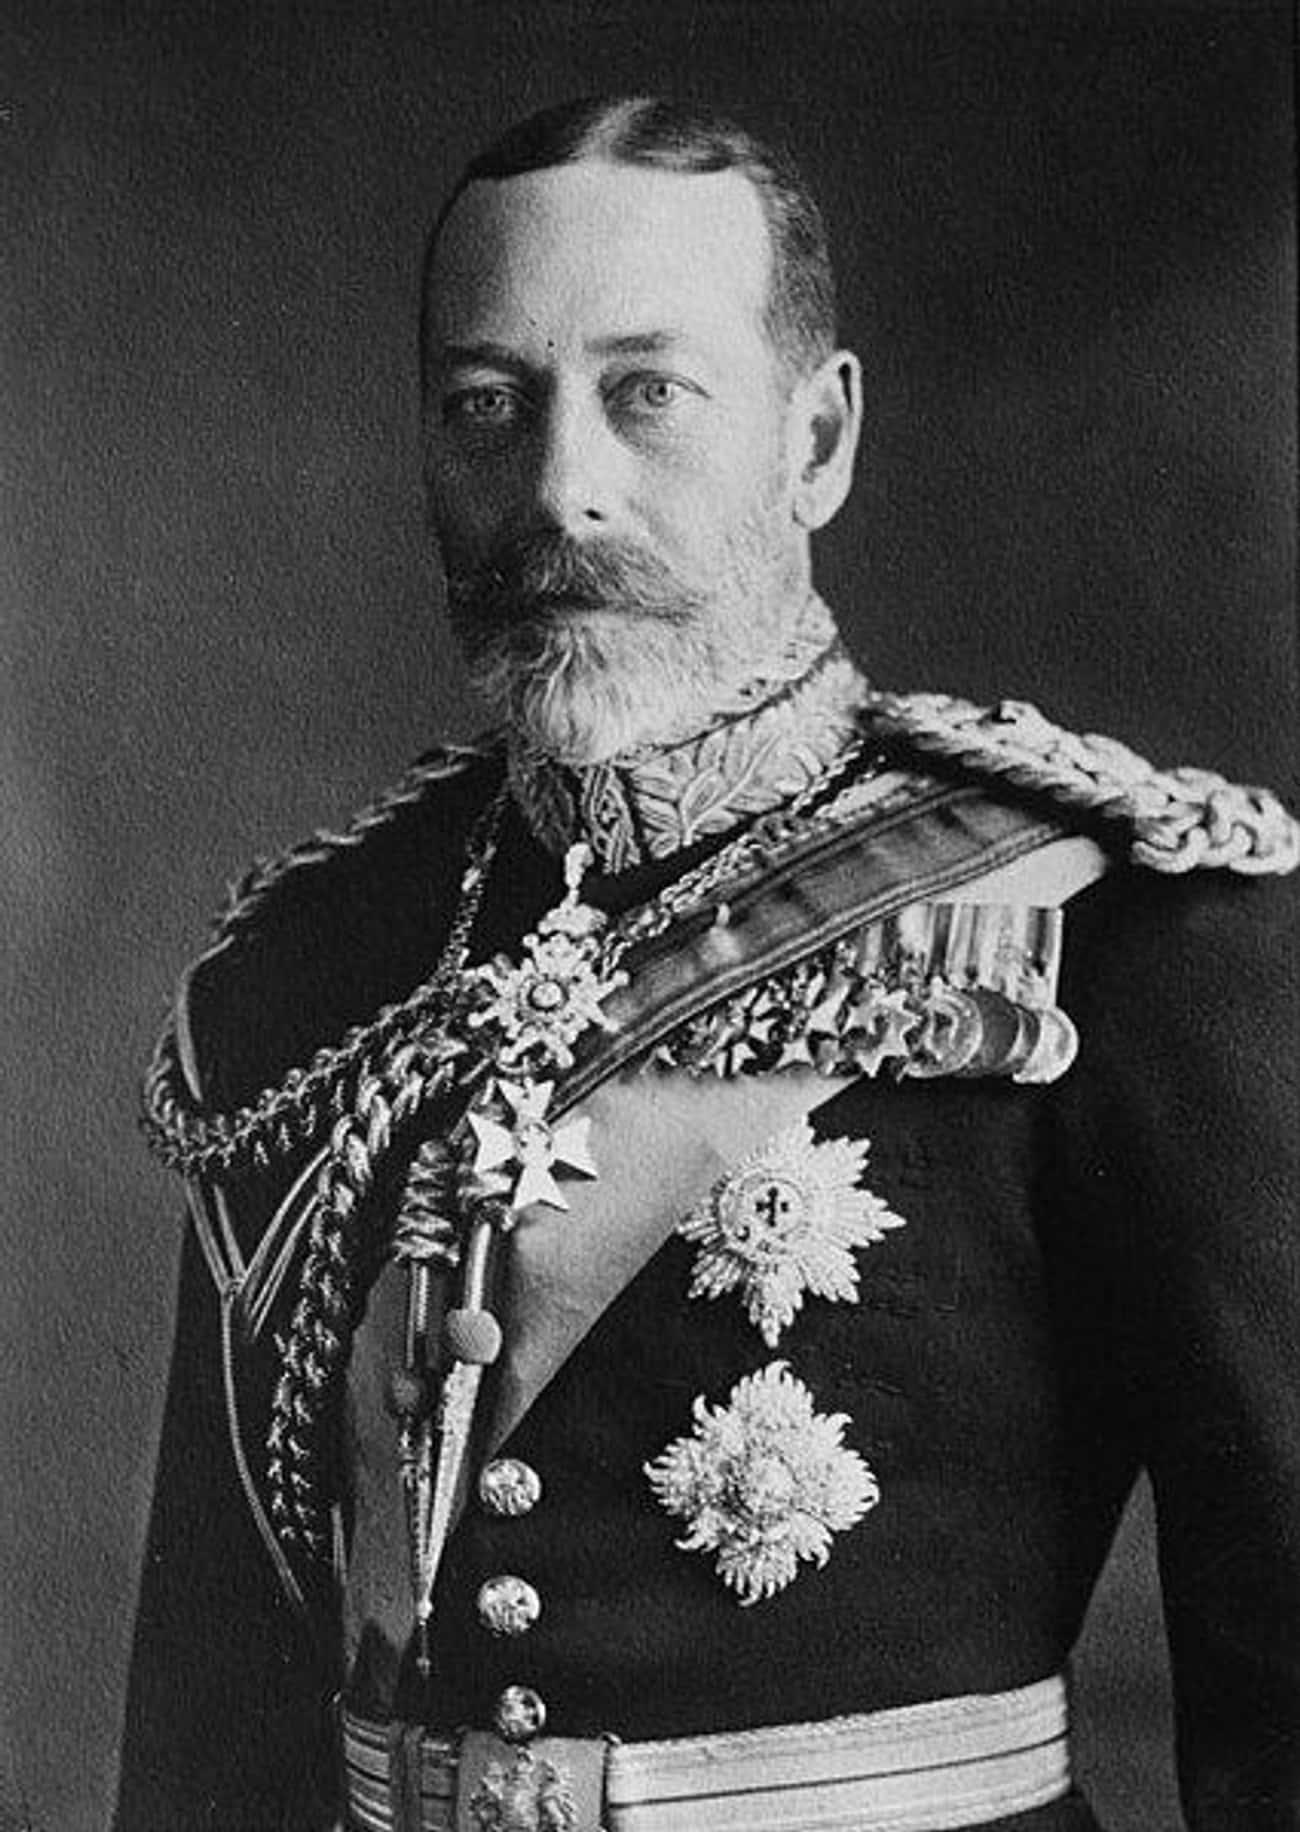 King George V Was Euthanized, But Some Scholars See It As Murder 